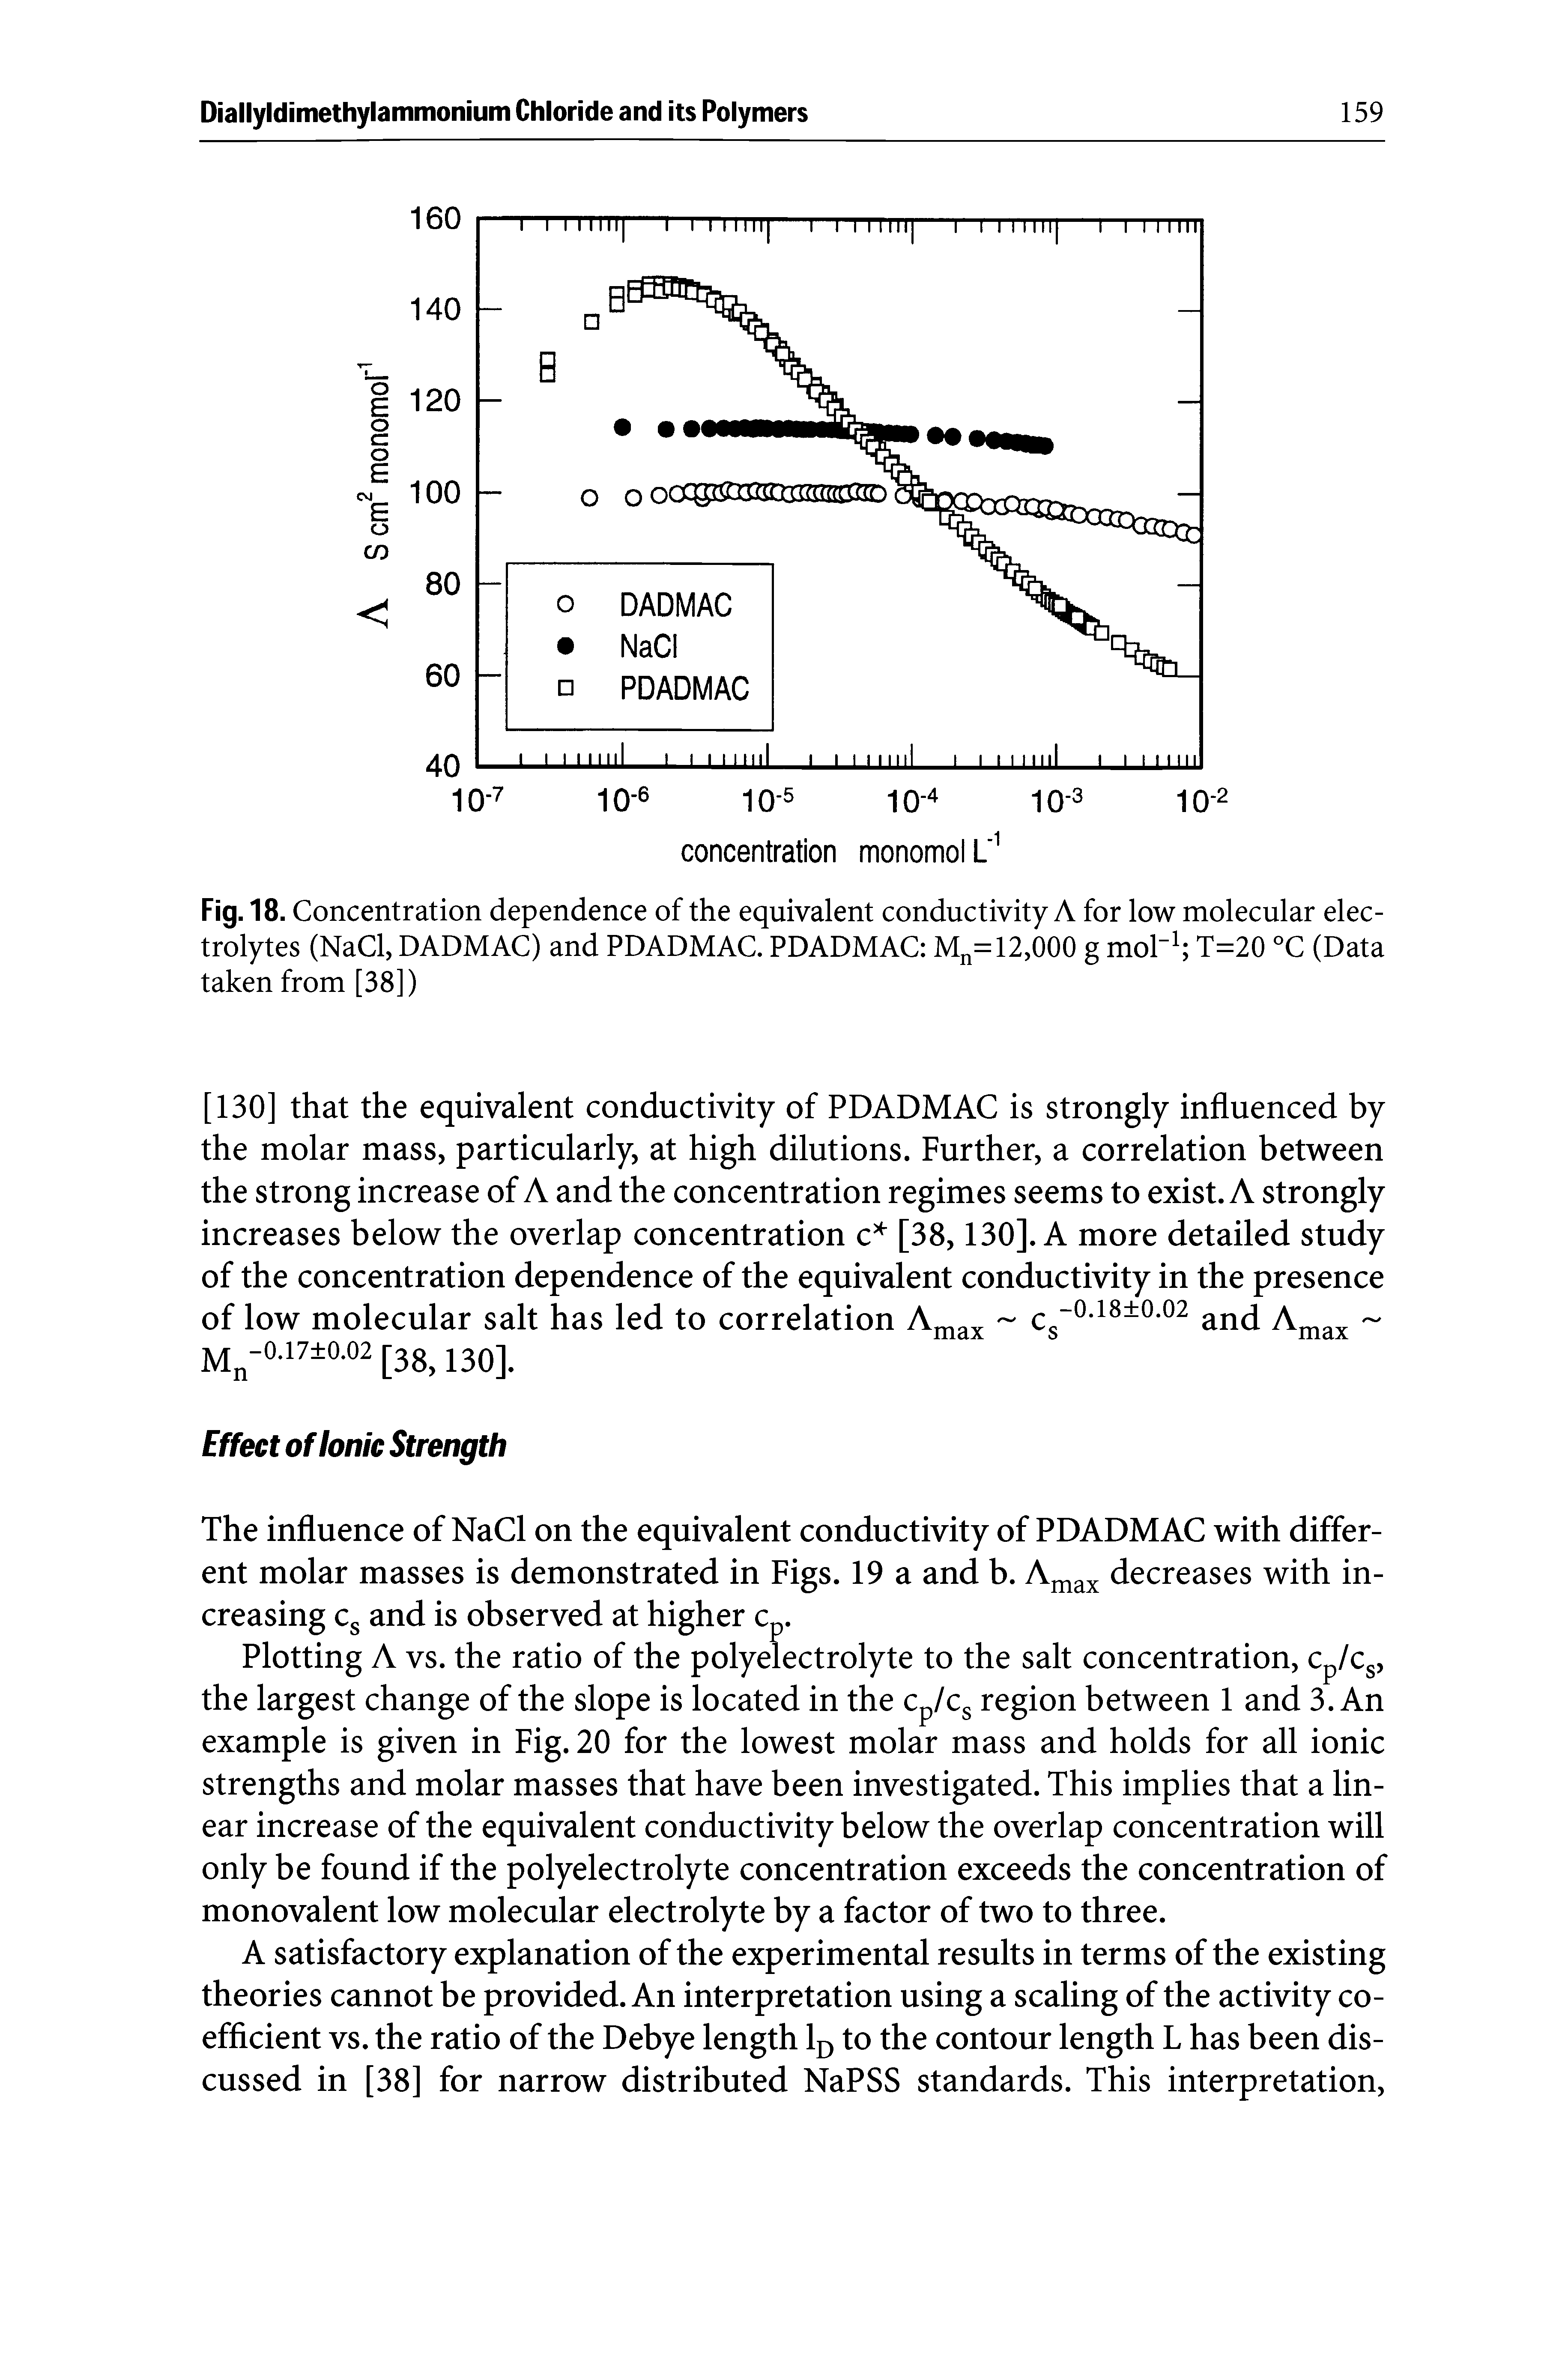 Fig. 18. Concentration dependence of the equivalent conductivity A for low molecular electrolytes (NaCl, DADMAC) and PDADMAC. PDADMAC Mn= 12,000 g mol"1 T=20 °C (Data taken from [38])...